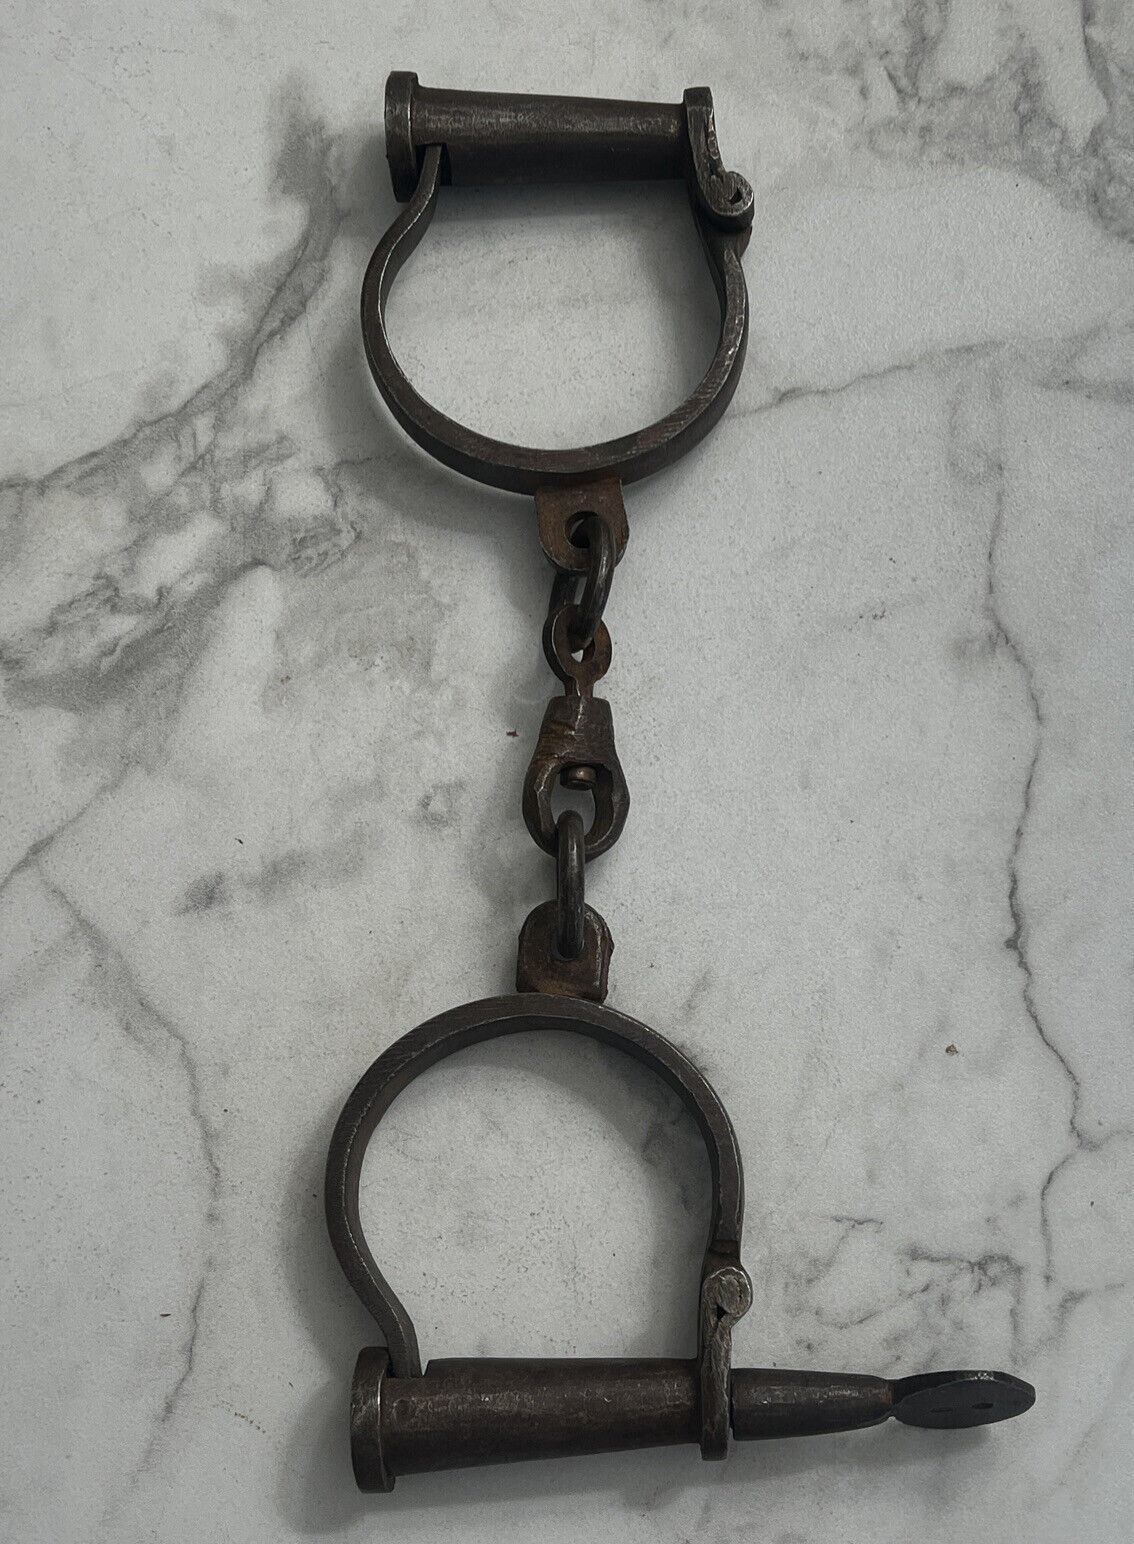 Replica Antique style Handcuffs, Metal, Stamped \